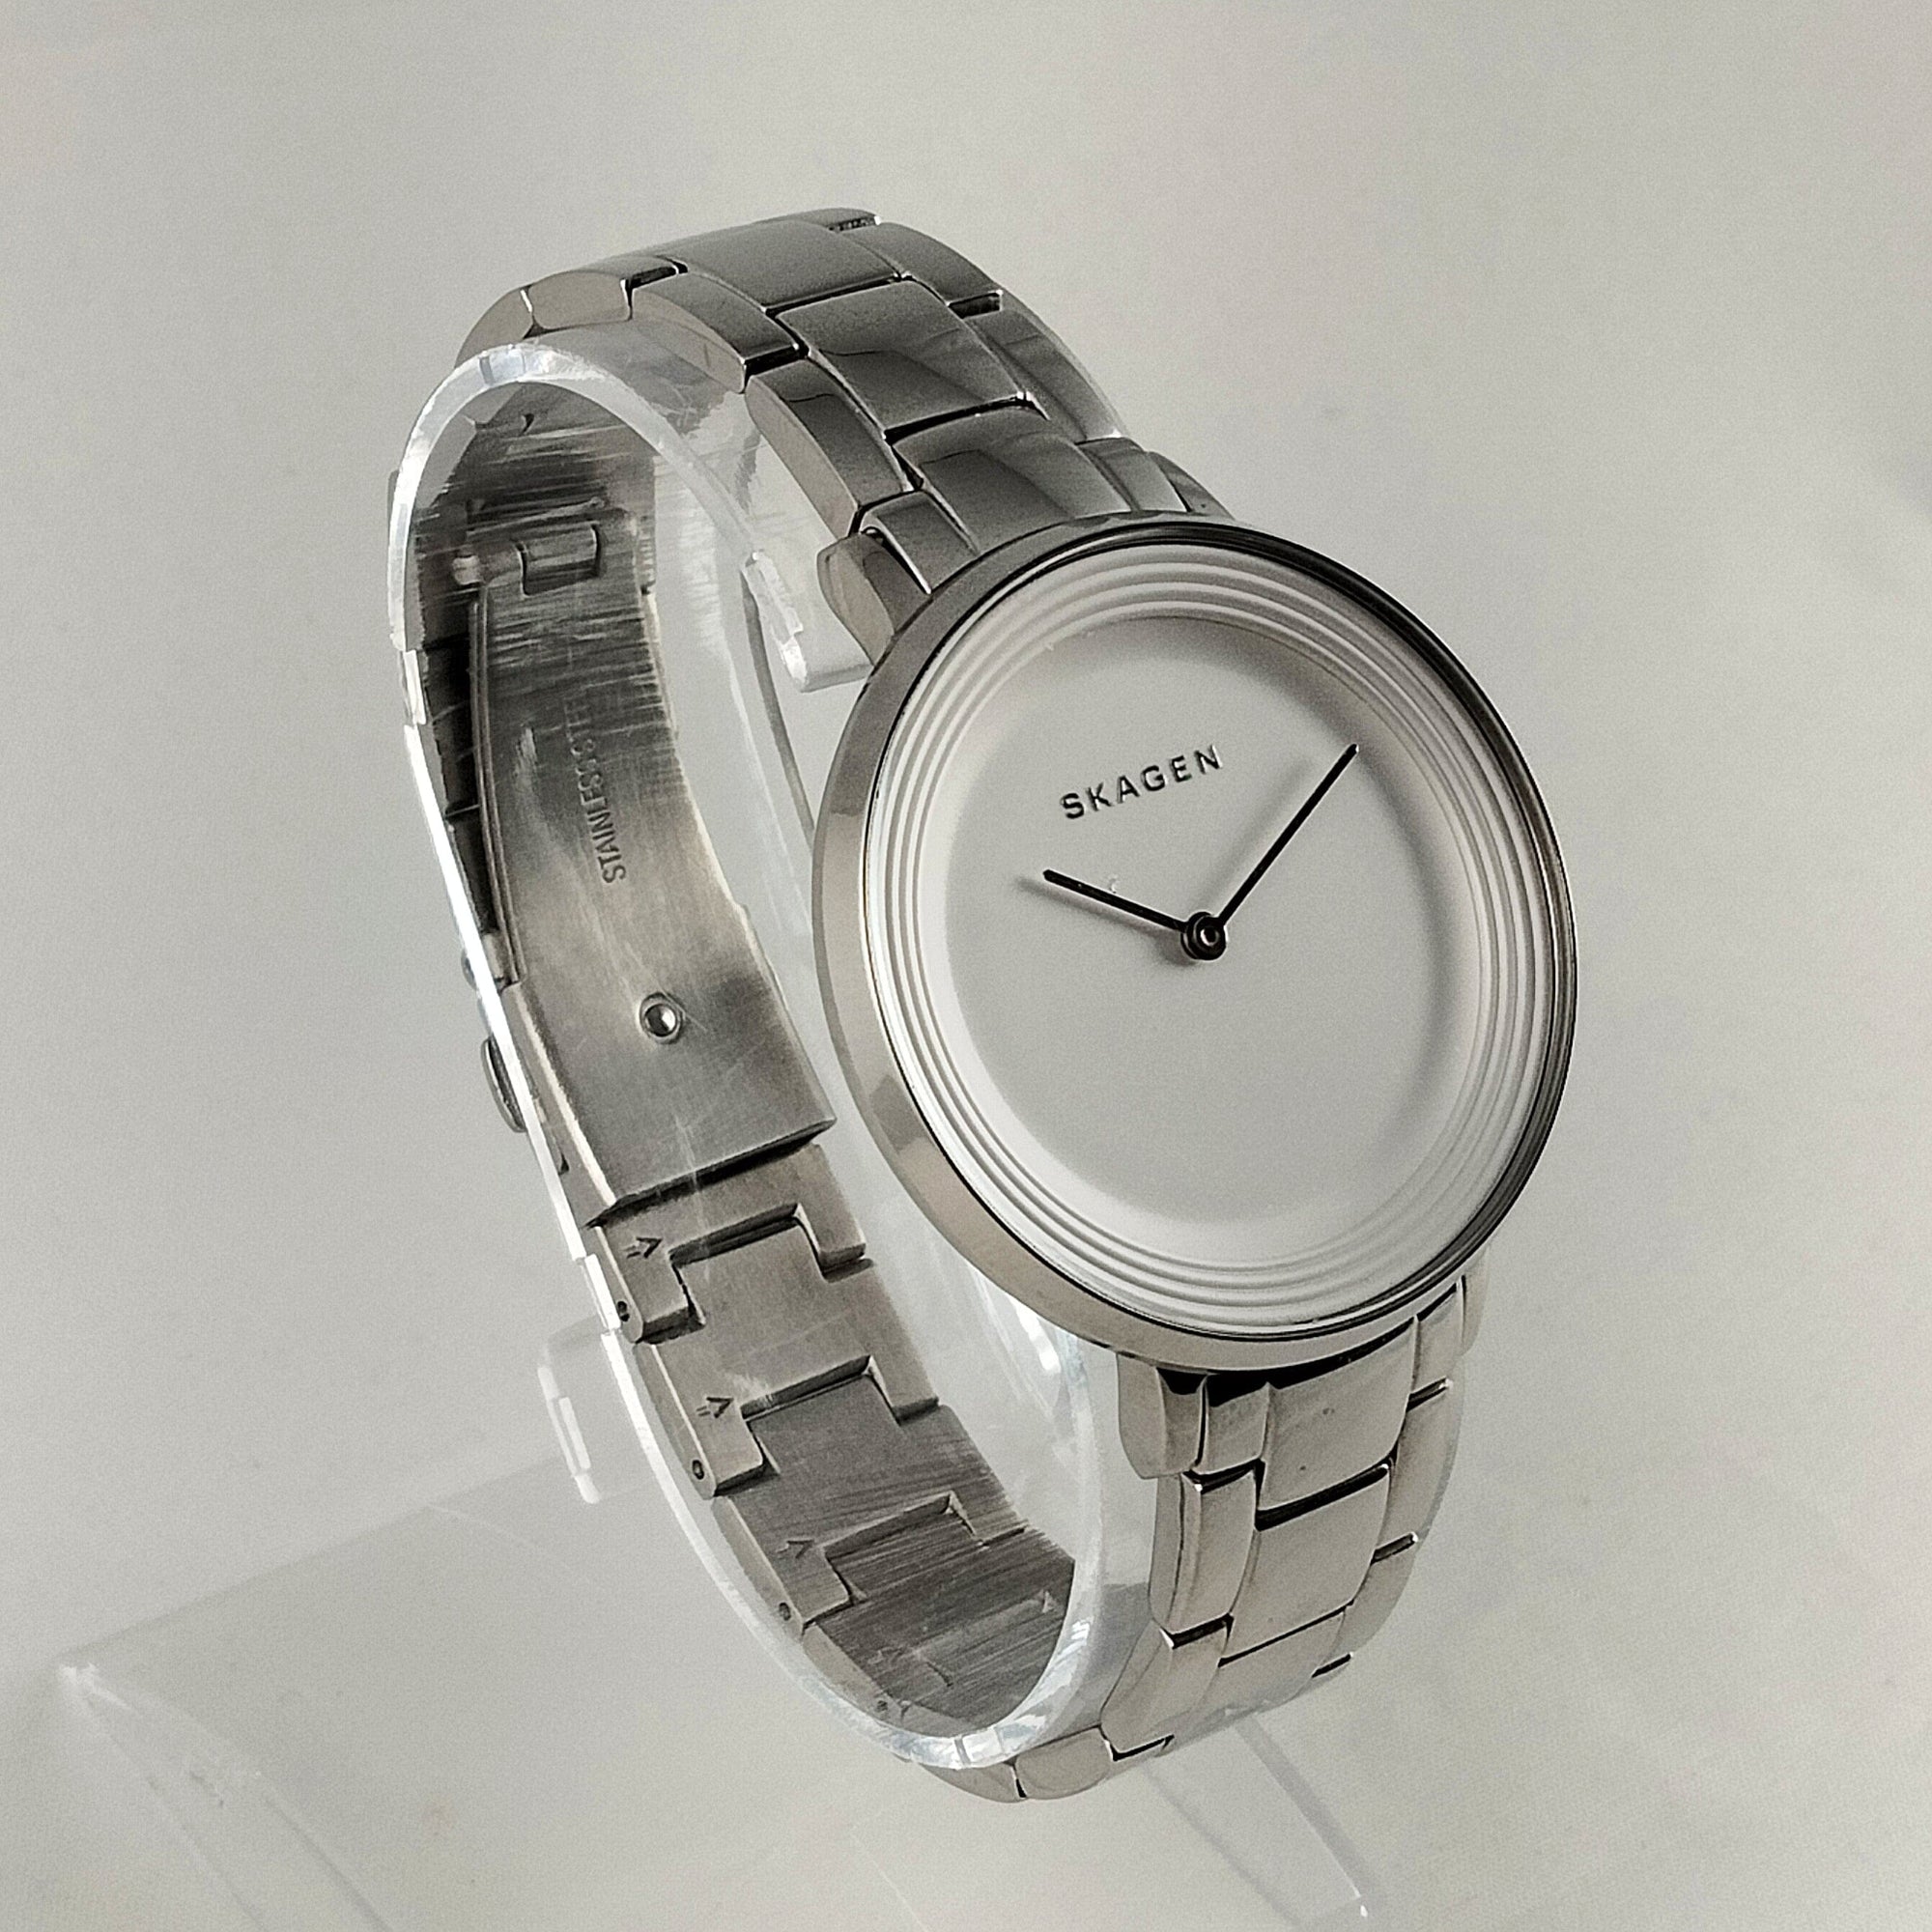 I Like Mikes Mid Century Modern Watches Skagen Men's Stainless Steel Watch, White Dial with Thin Ringed Border, Bracelet Strap